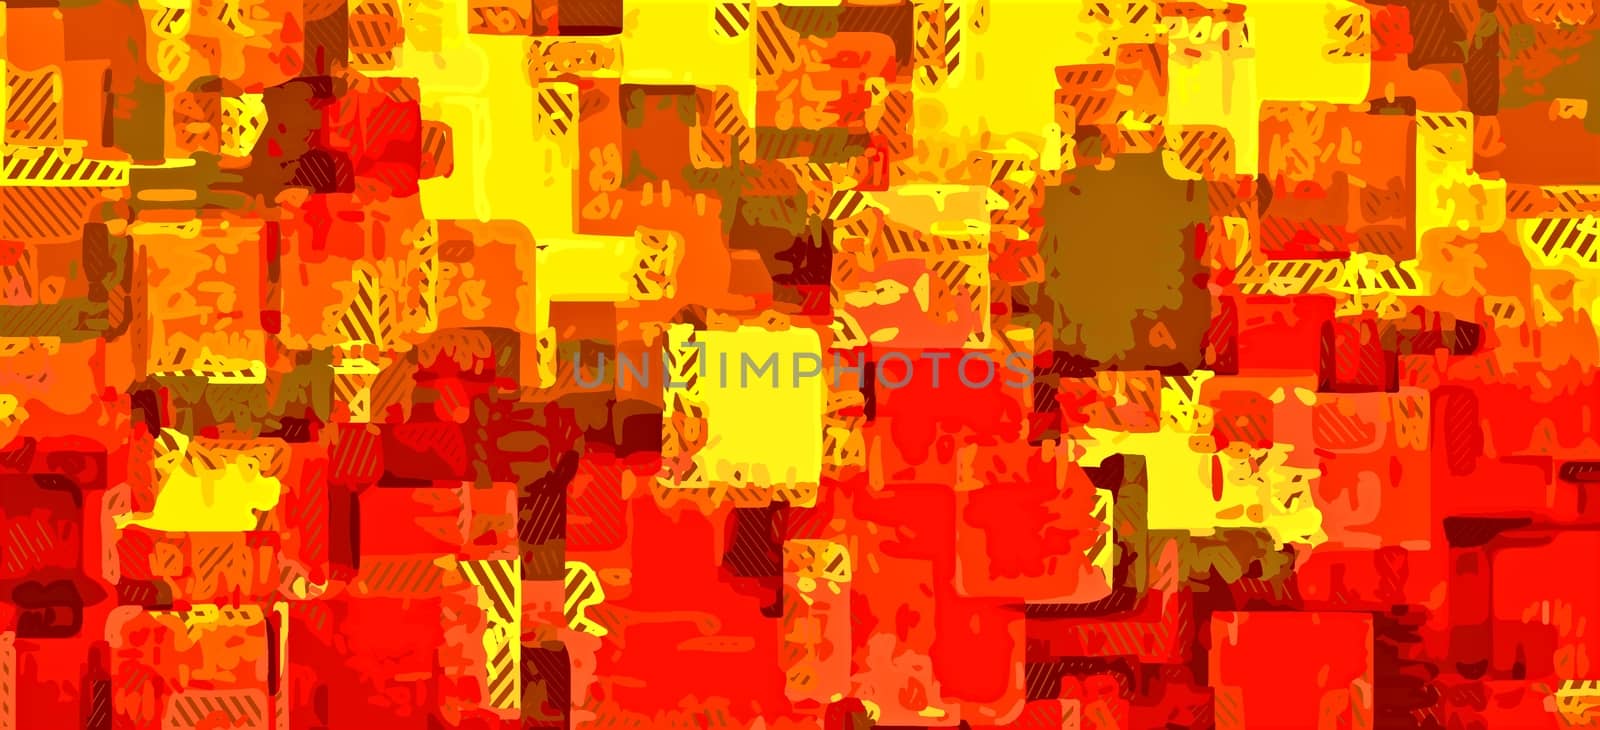 red orange and yellow painting abstract background